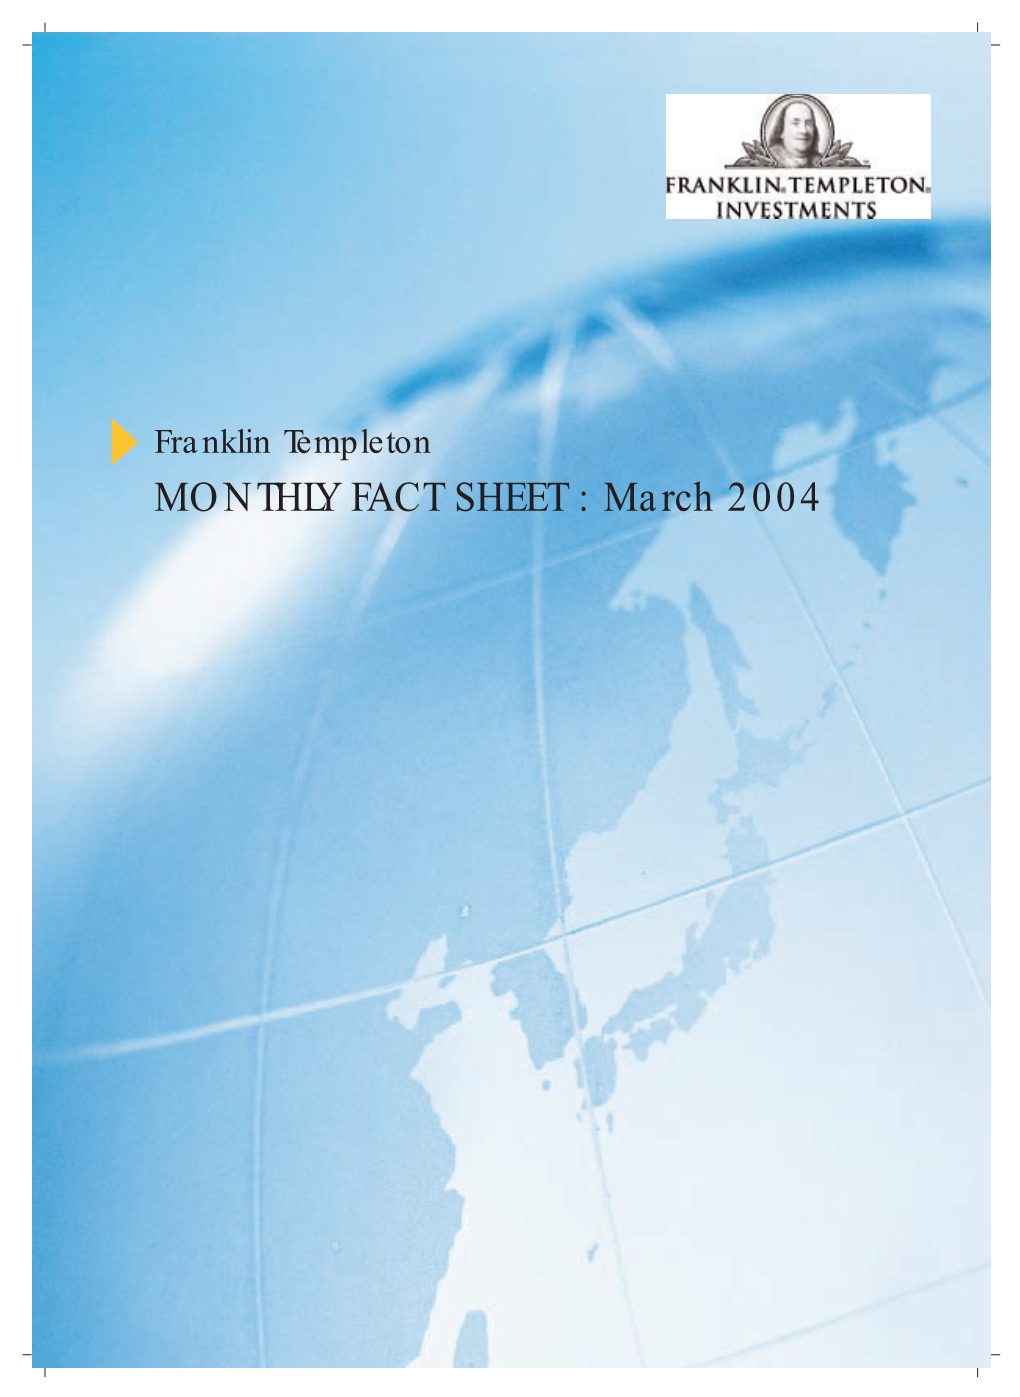 Franklin Templeton MONTHLY FACT SHEET : March 2004